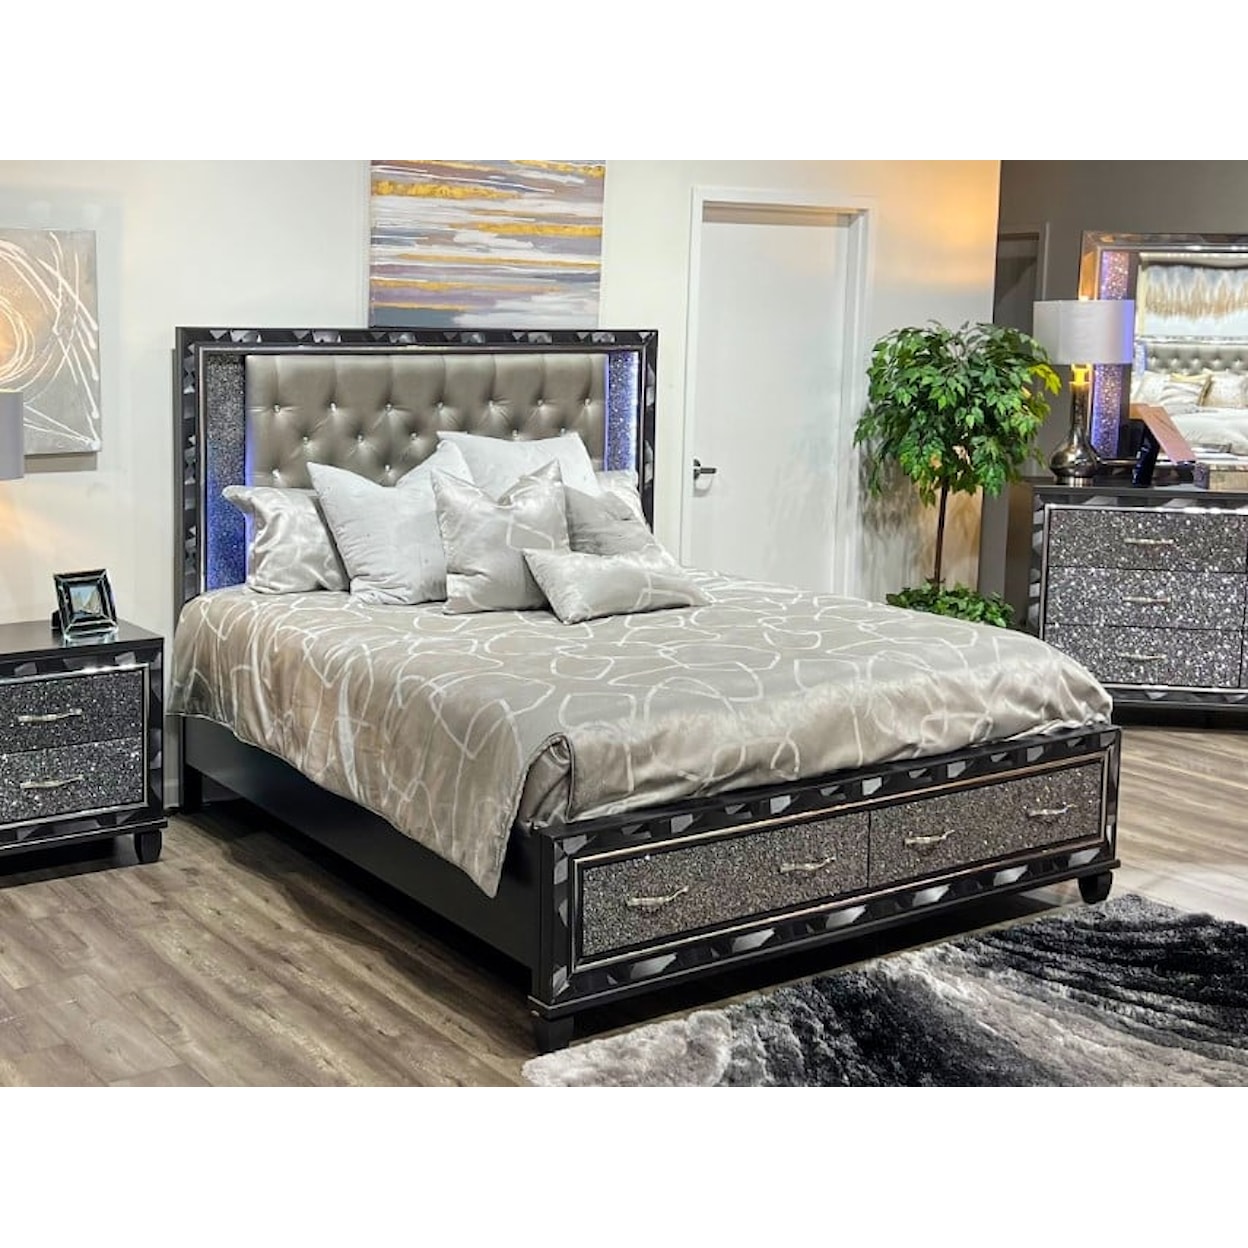 New Classic Furniture Radiance Glam Queen Bed w/Storage Footboard & Rails